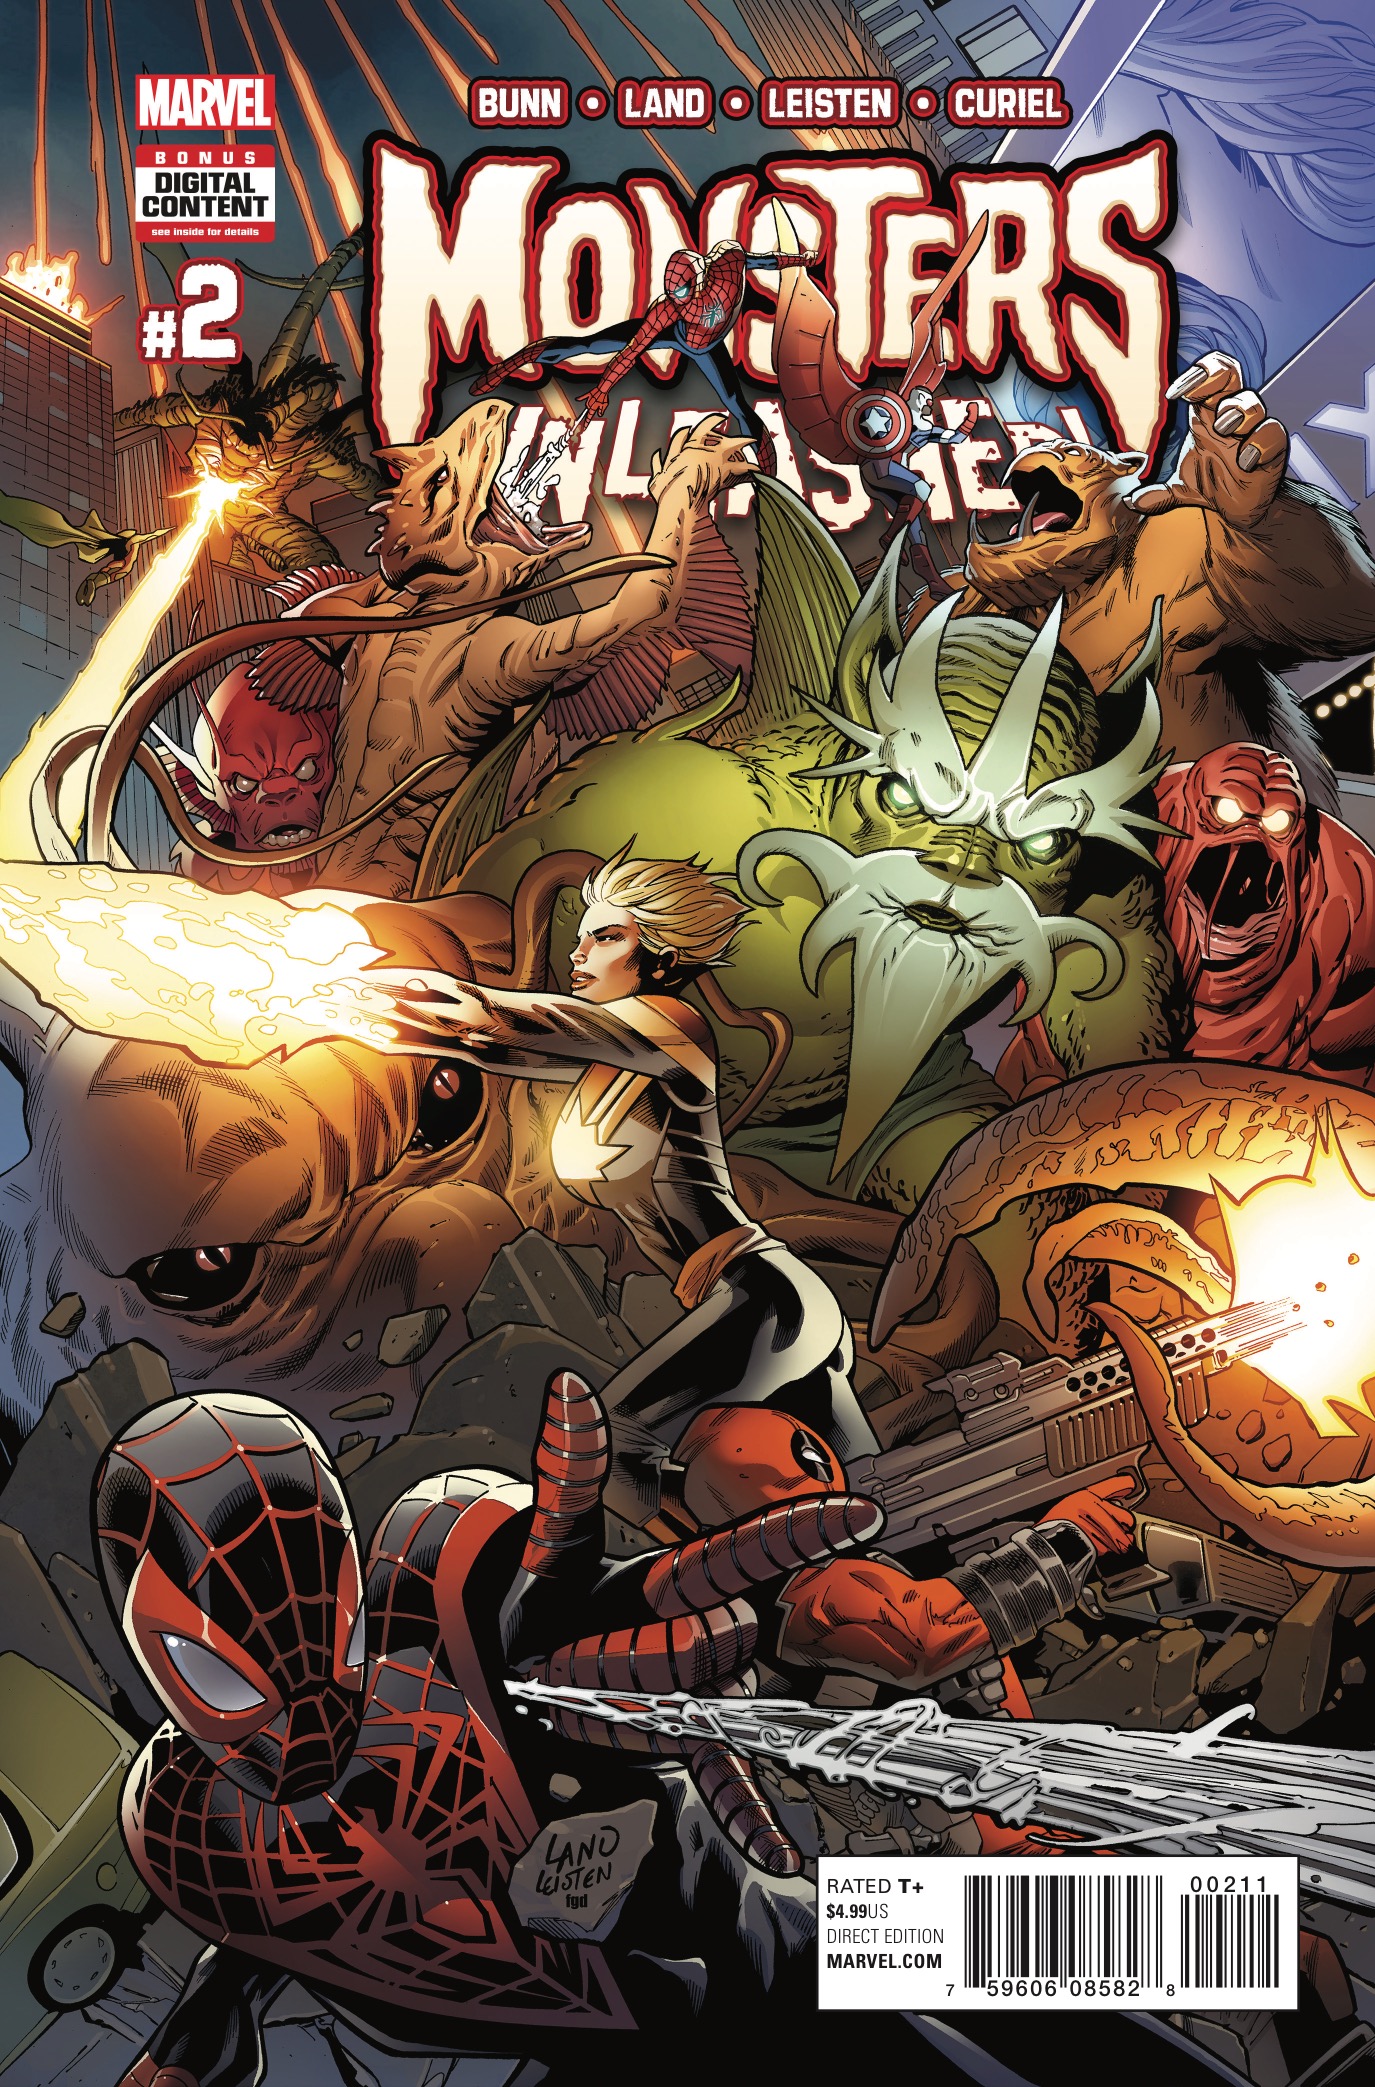 Monsters Unleashed #2 Review